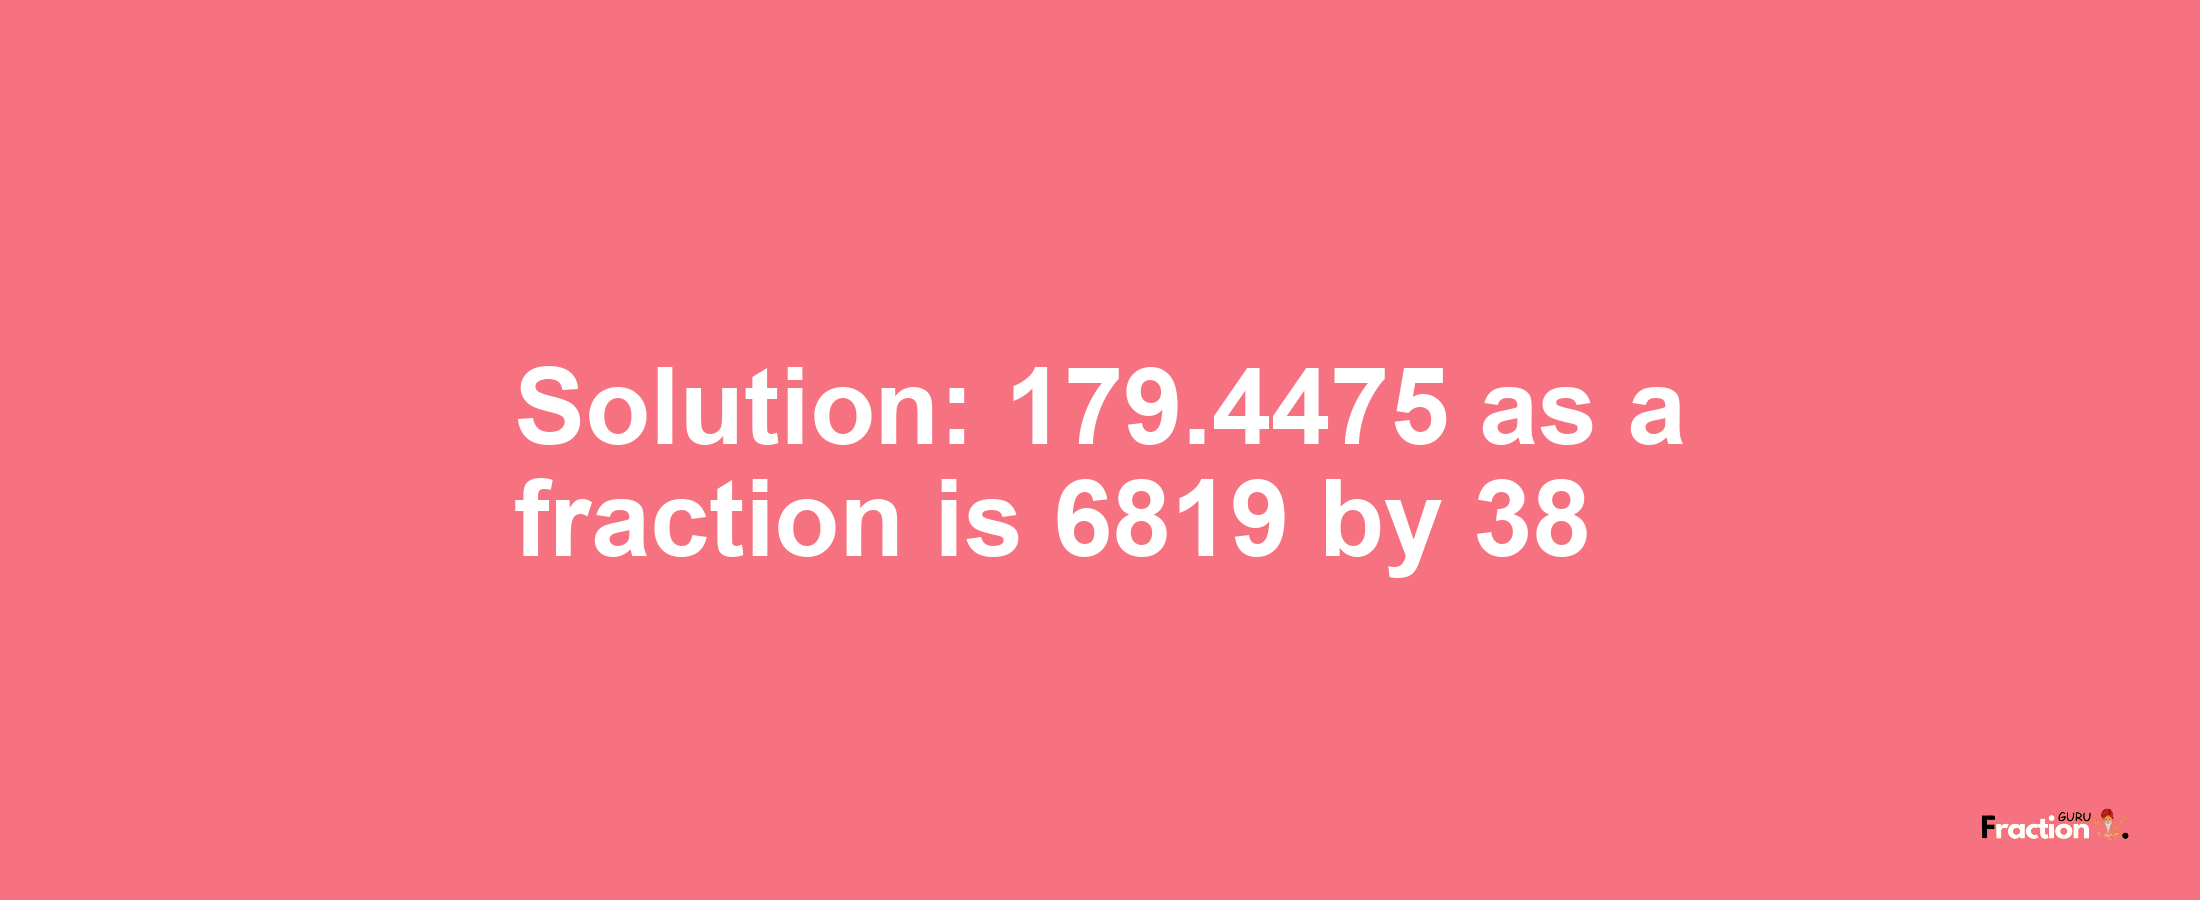 Solution:179.4475 as a fraction is 6819/38